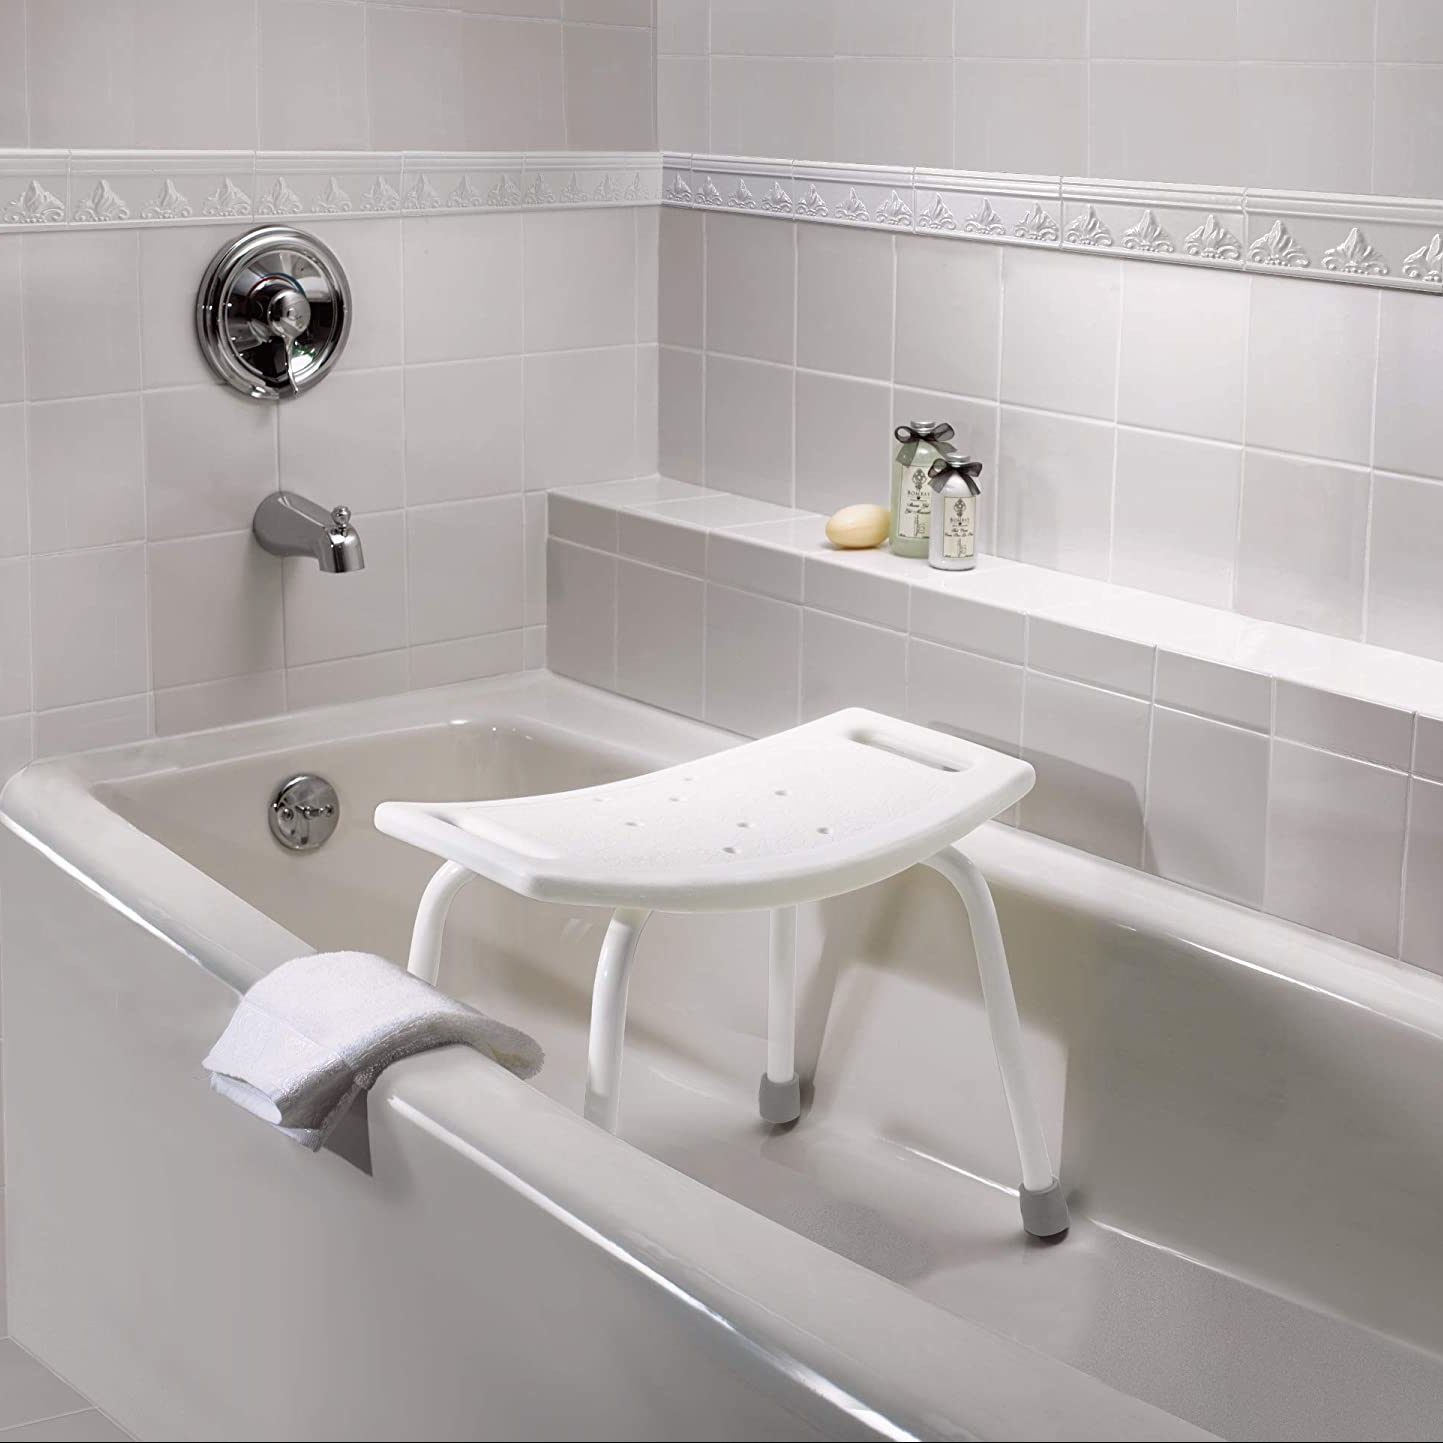 5 Best Shower Chairs to Make Your Bath Comfortable and Accessible